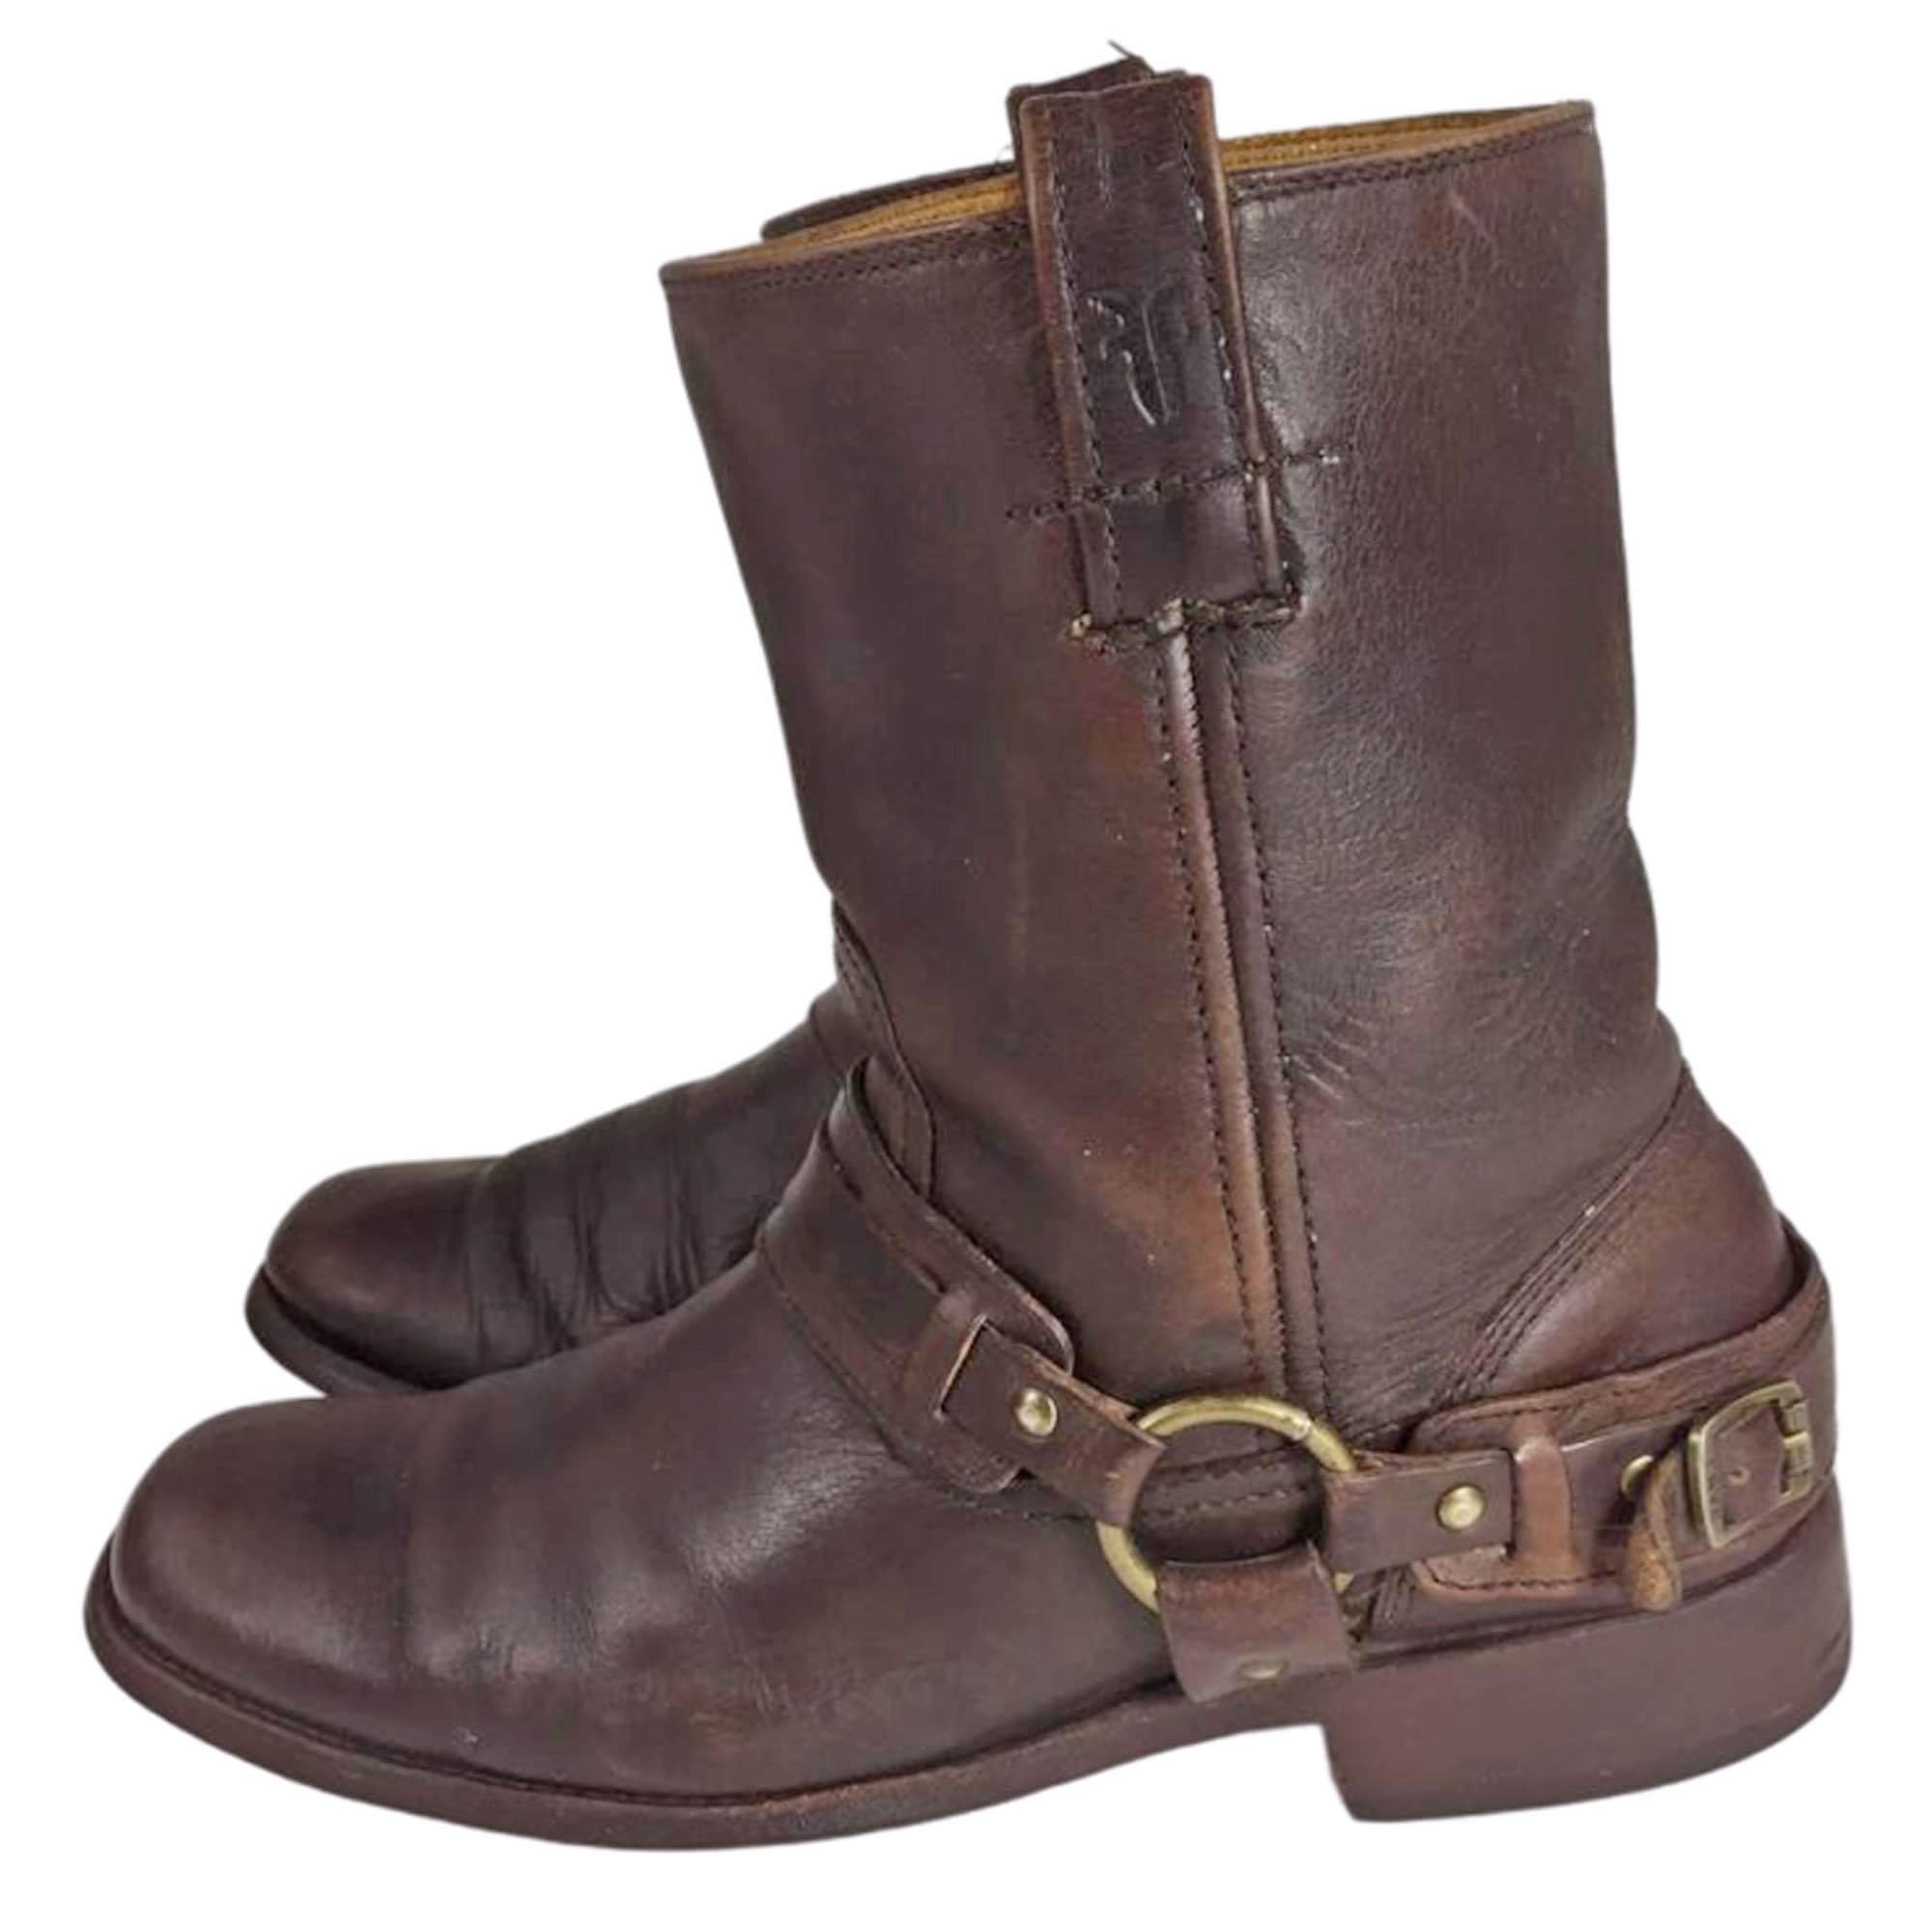 FRYE 87465 JESSE HARNESS Brown Leather Motorcycle Boots Men's Size 8.5 ...